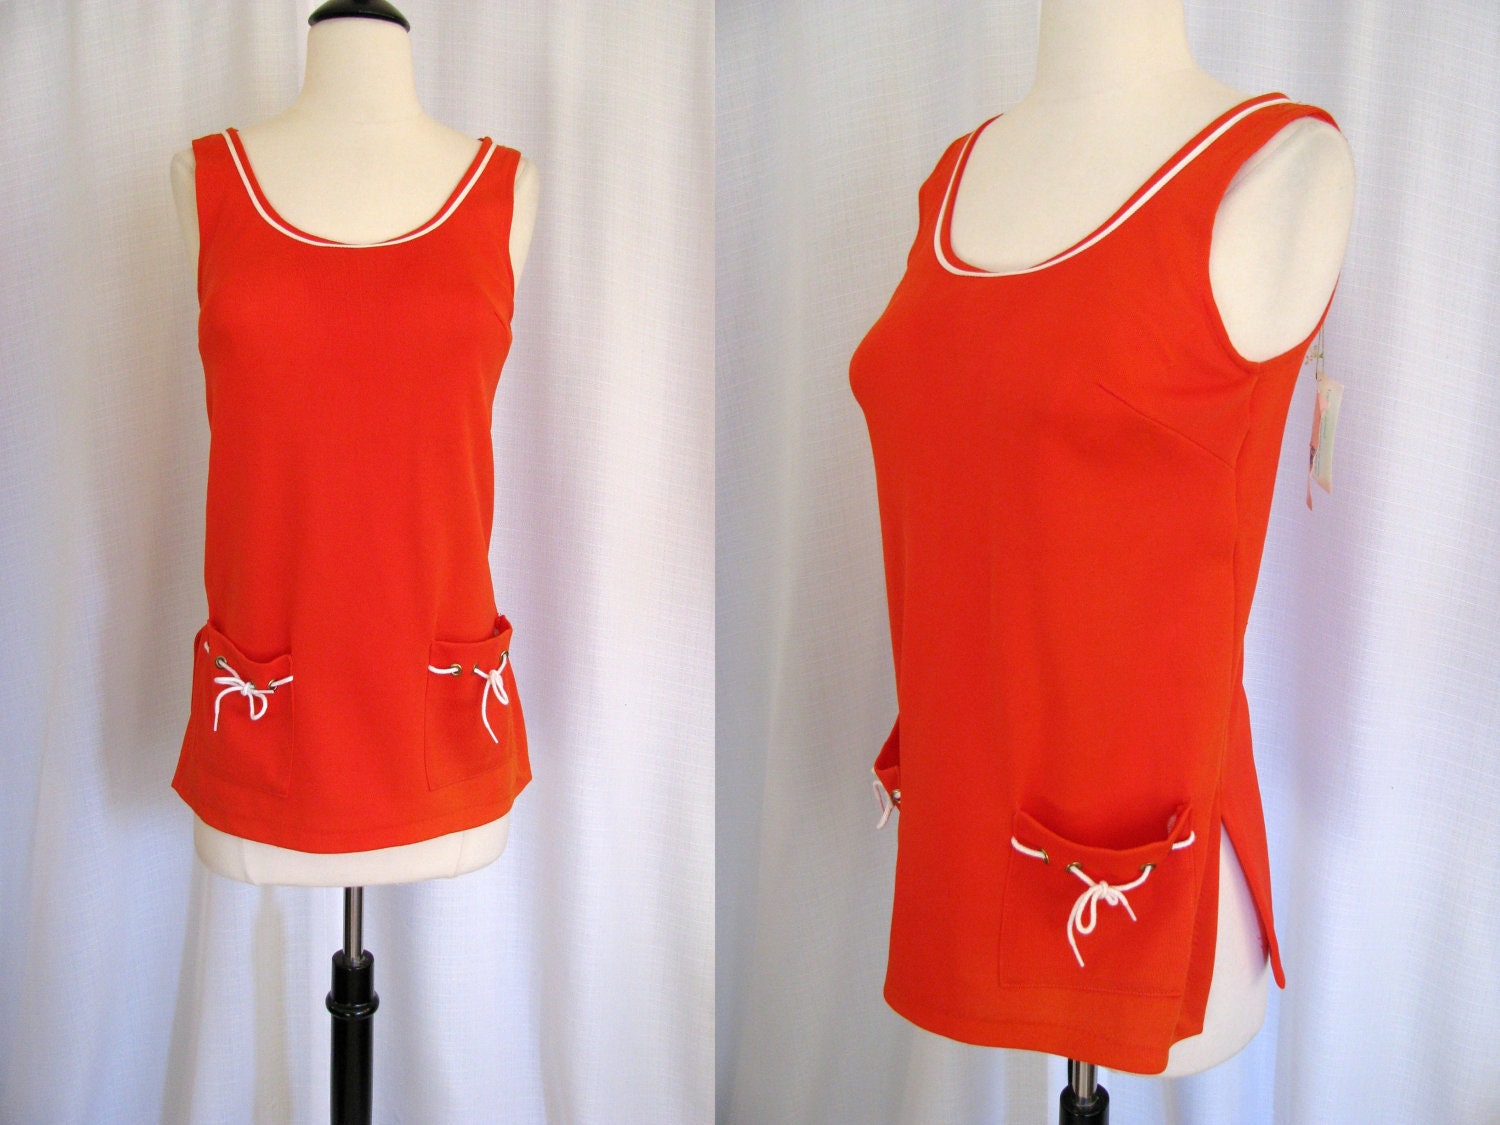 Vintage 1960s Carol Brent Tangerine Orange and White Swimsuit Top with Original Tags - NWT Size S